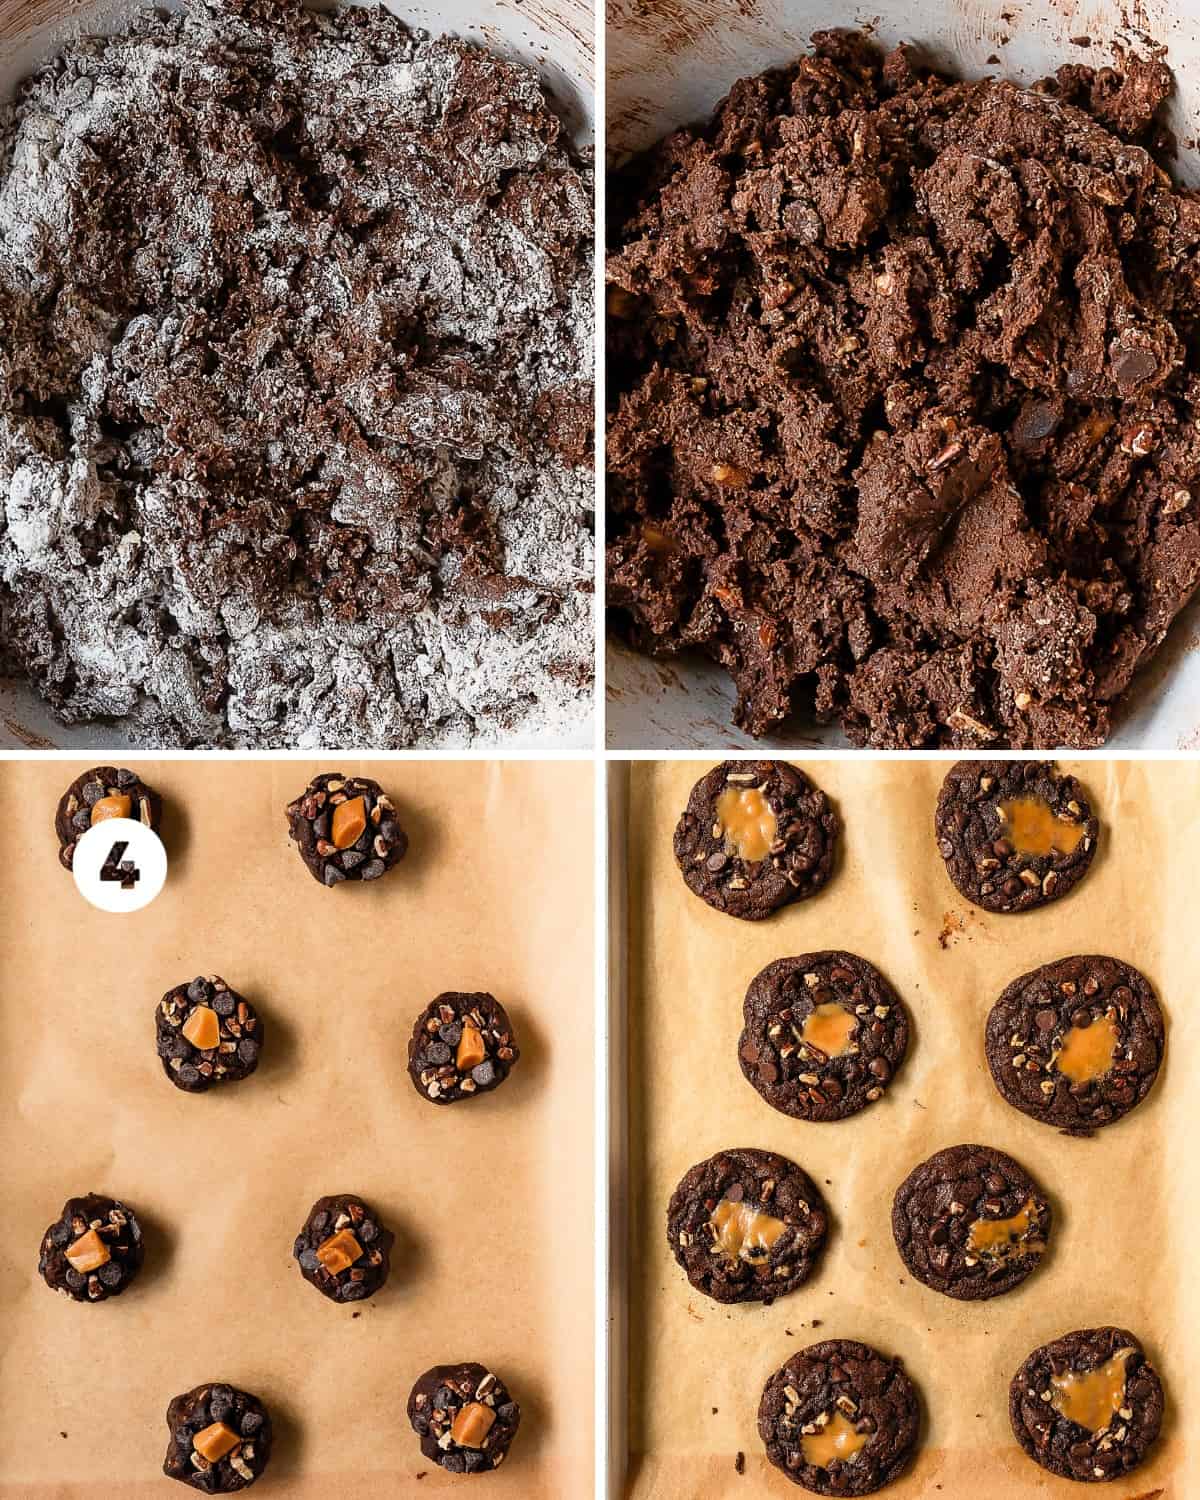 Preheat the oven to 375 F (190 C) for about 30 minutes before baking the cookies. Line a large baking sheet with parchment paper. Allow the dough to rest while the oven preheats for 30 minutes. Using a medium cookie scoop (2 tablespoons, 30 ml), scoop the chocolate turtle cookie dough into a ball, roll the dough ball into the reserved cup of pecans, chocolate and caramel pieces and place the cookie dough balls onto the lined baking sheet about 3 inches (8 cm) apart. Bake at 375 F (190 C) for 9 - 11 minutes or until the edges of the cookies are set and the centers are slightly puffed. Cool the e cookies on the baking sheet for 5 minutes. Then transfer to a cooling rack to cool completely to room temperature. Drizzle the top of each cookie with the melted chocolate if you like and enjoy!